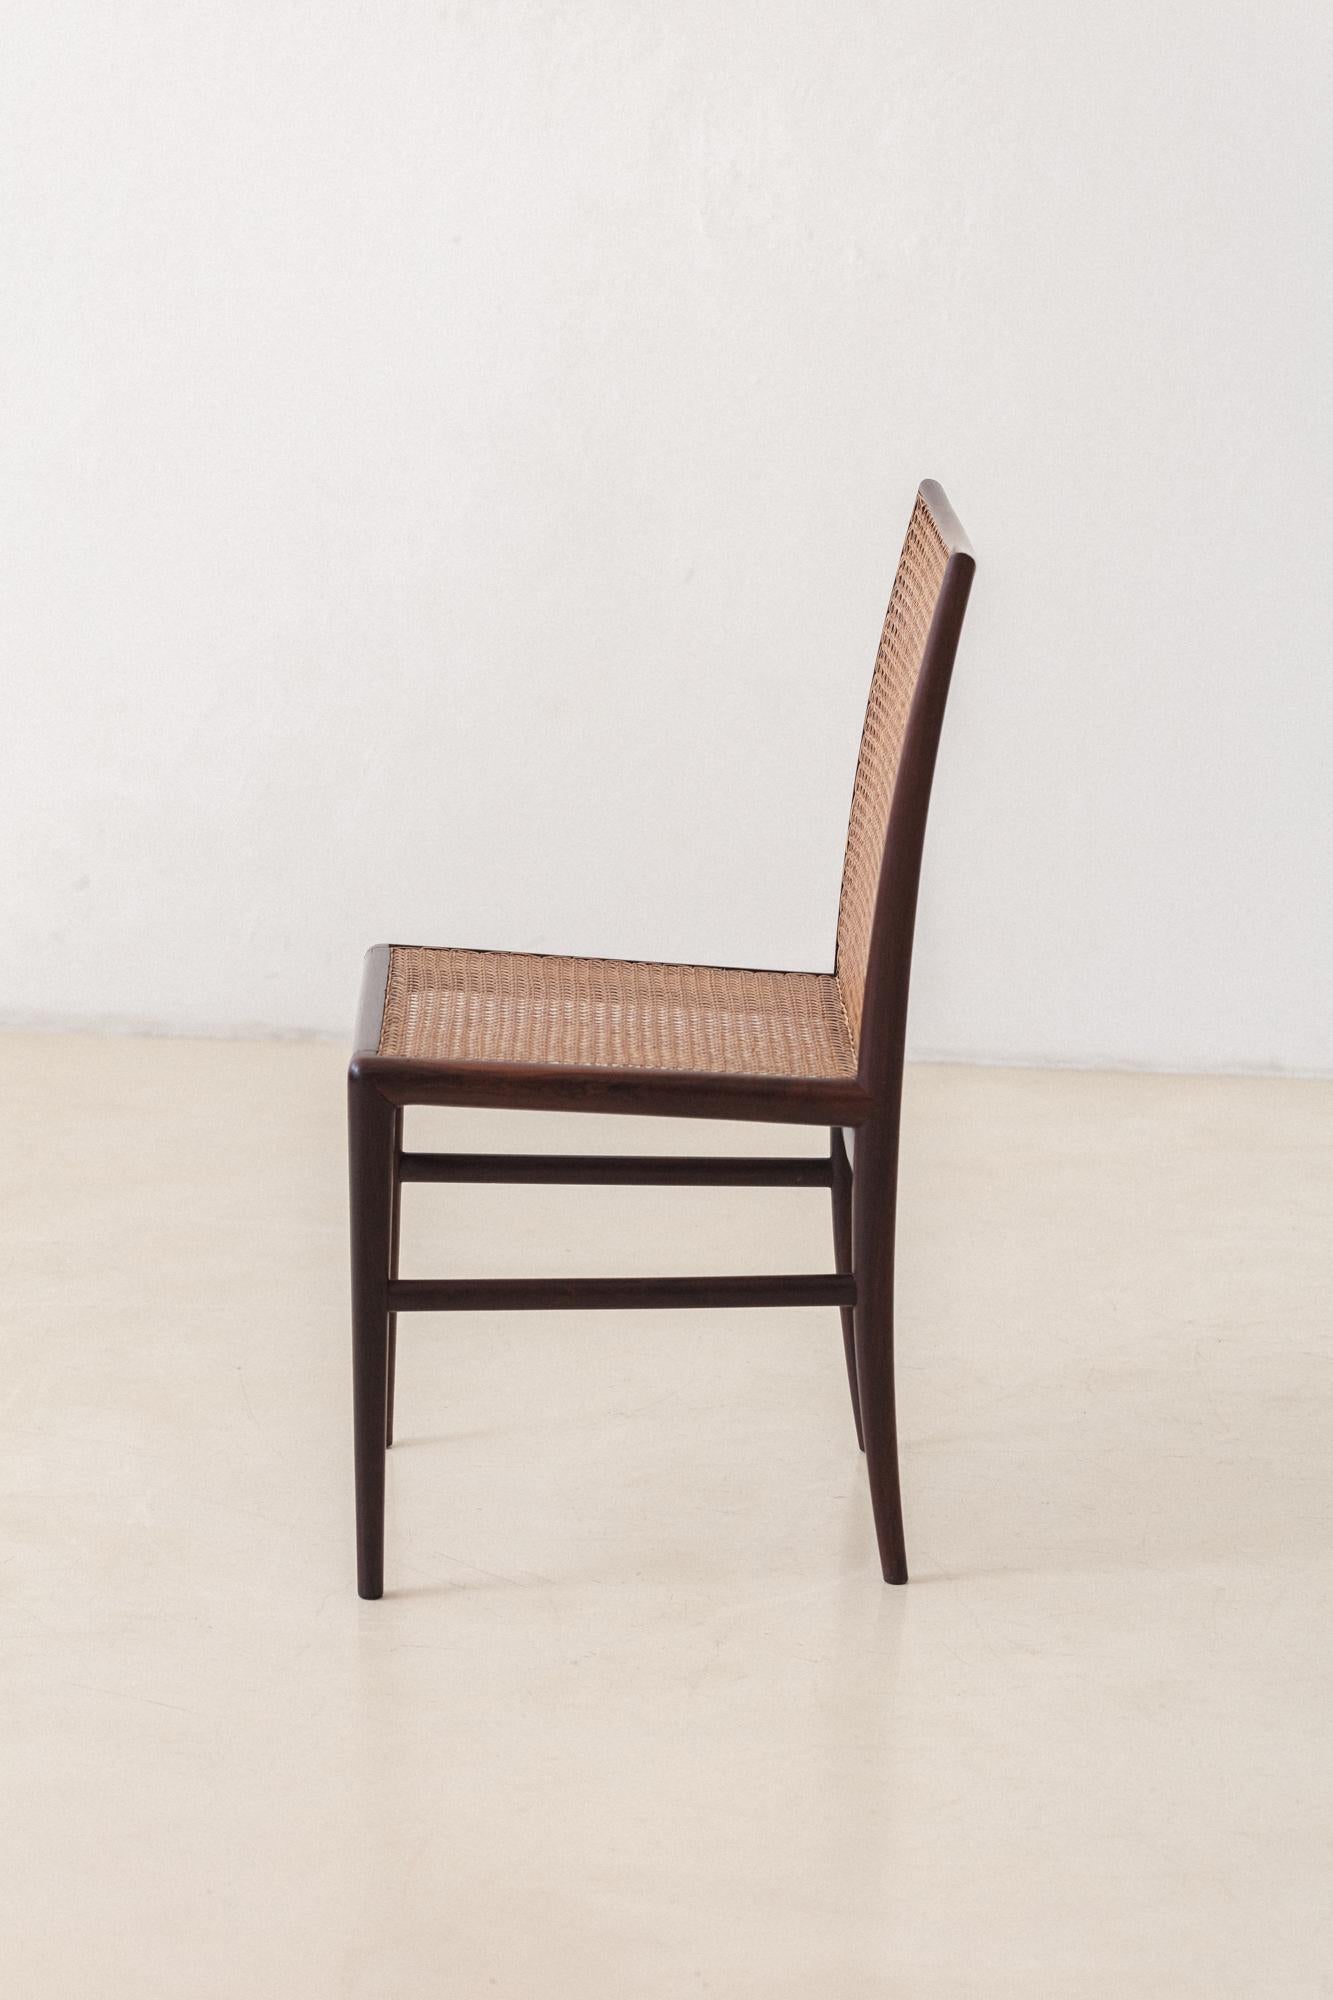 Set of 8 Rosewood Cane Chairs, Branco & Preto, 1952, Brazilian Midcentury For Sale 3